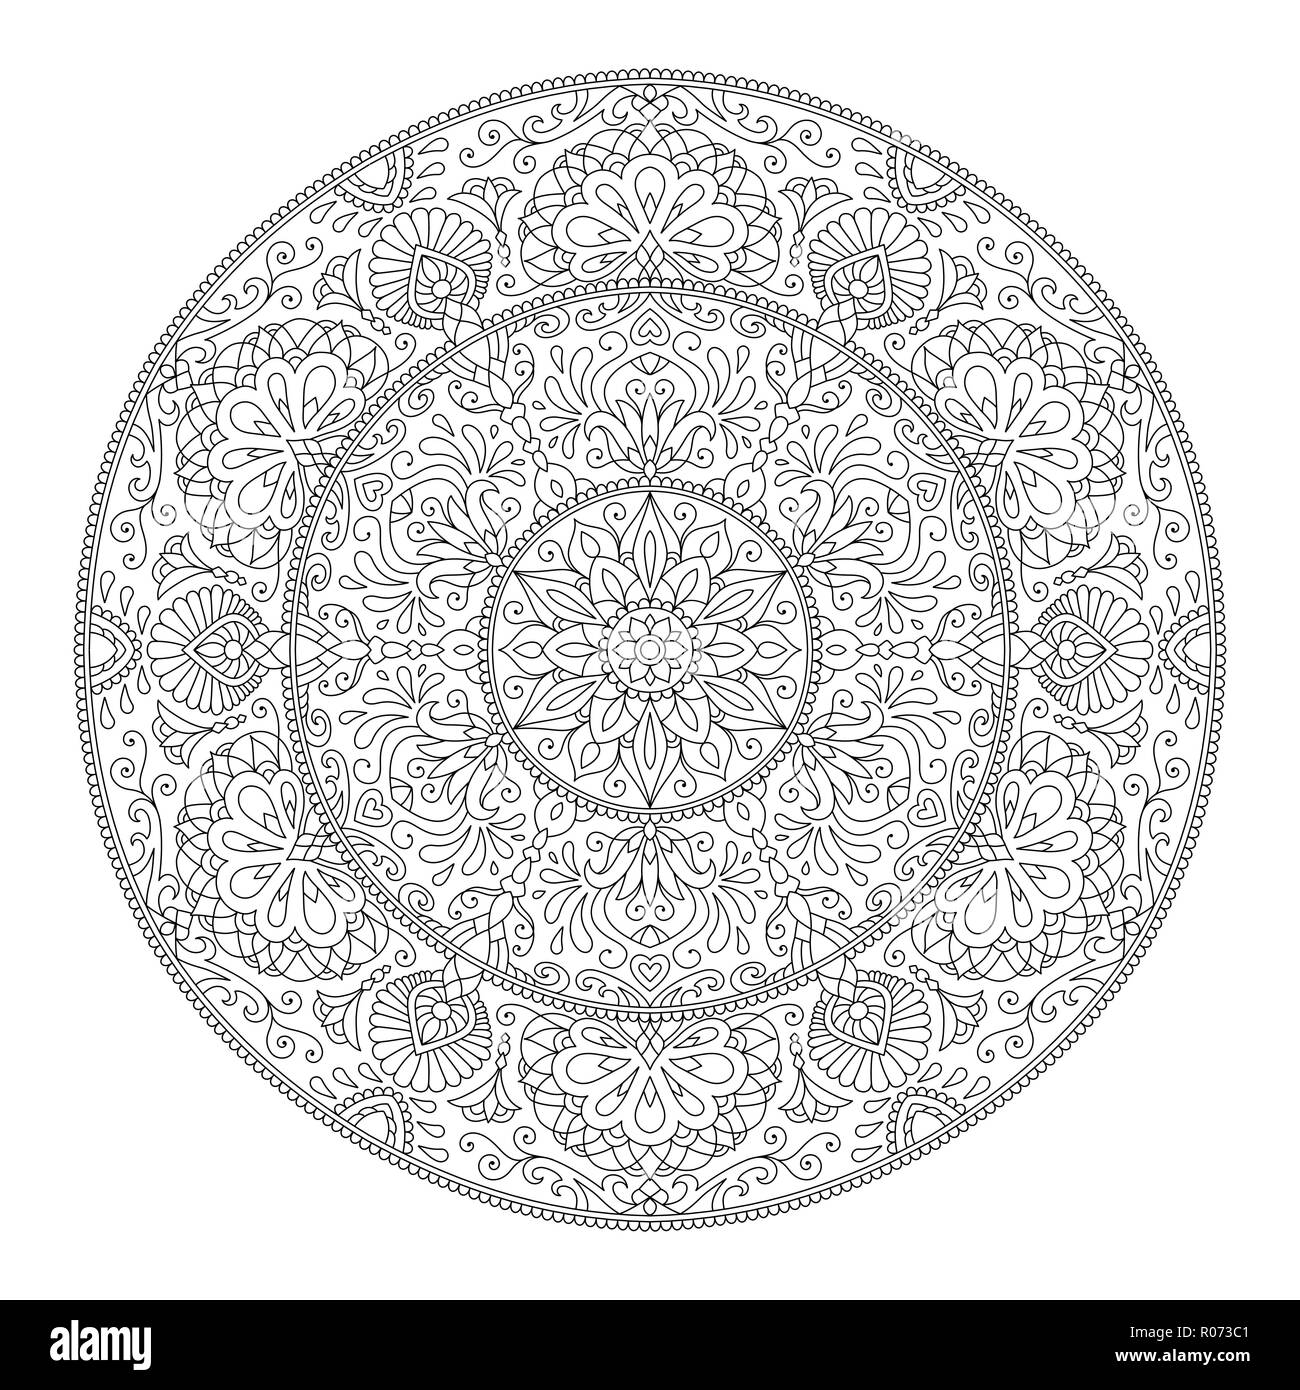 Mandala Coloring Page Flower Design Element for Adult Color Book Stock Vector